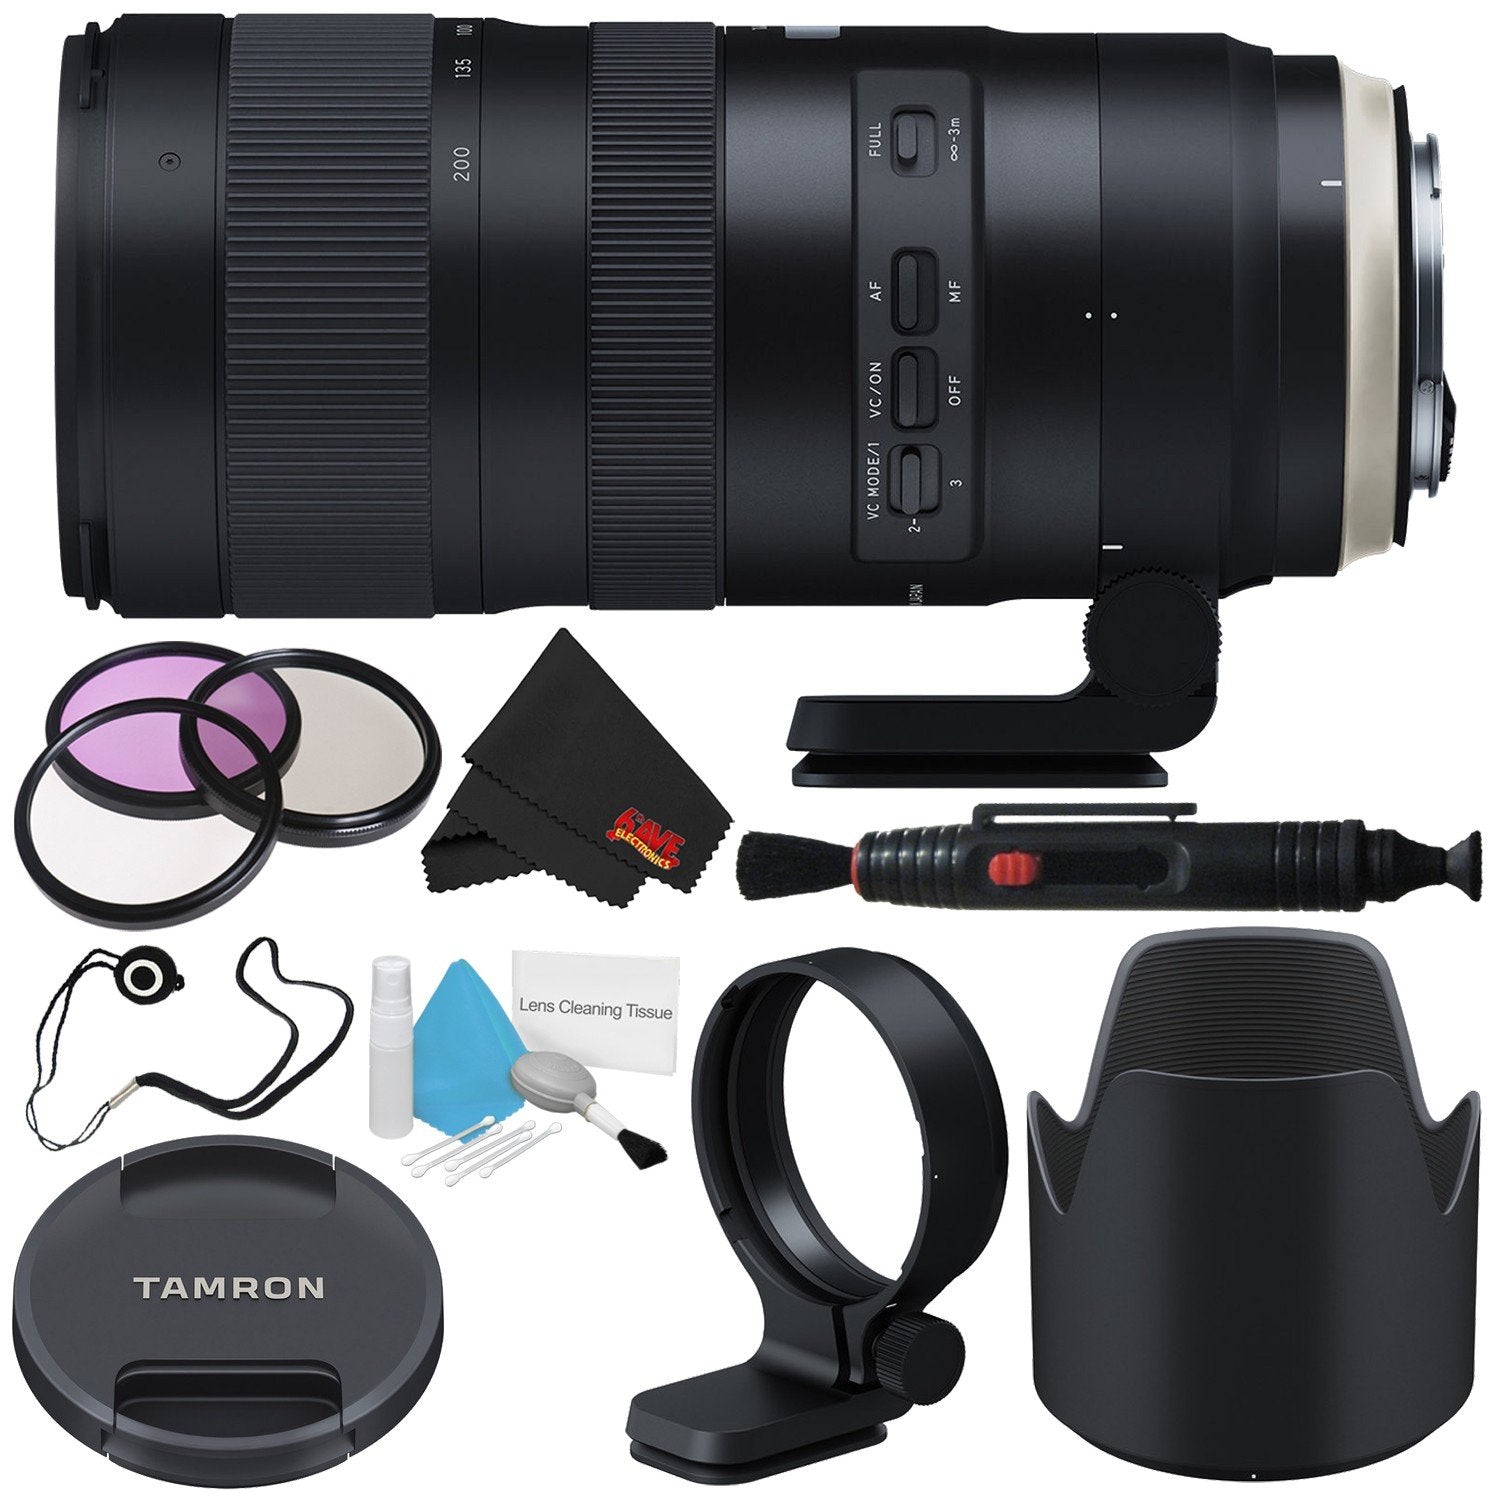 6Ave Tamron SP 70-200mm f/2.8 Di VC USD G2 Lens for Canon EF (International Model) + 77mm 3 Piece Filter Kit + Deluxe Cl